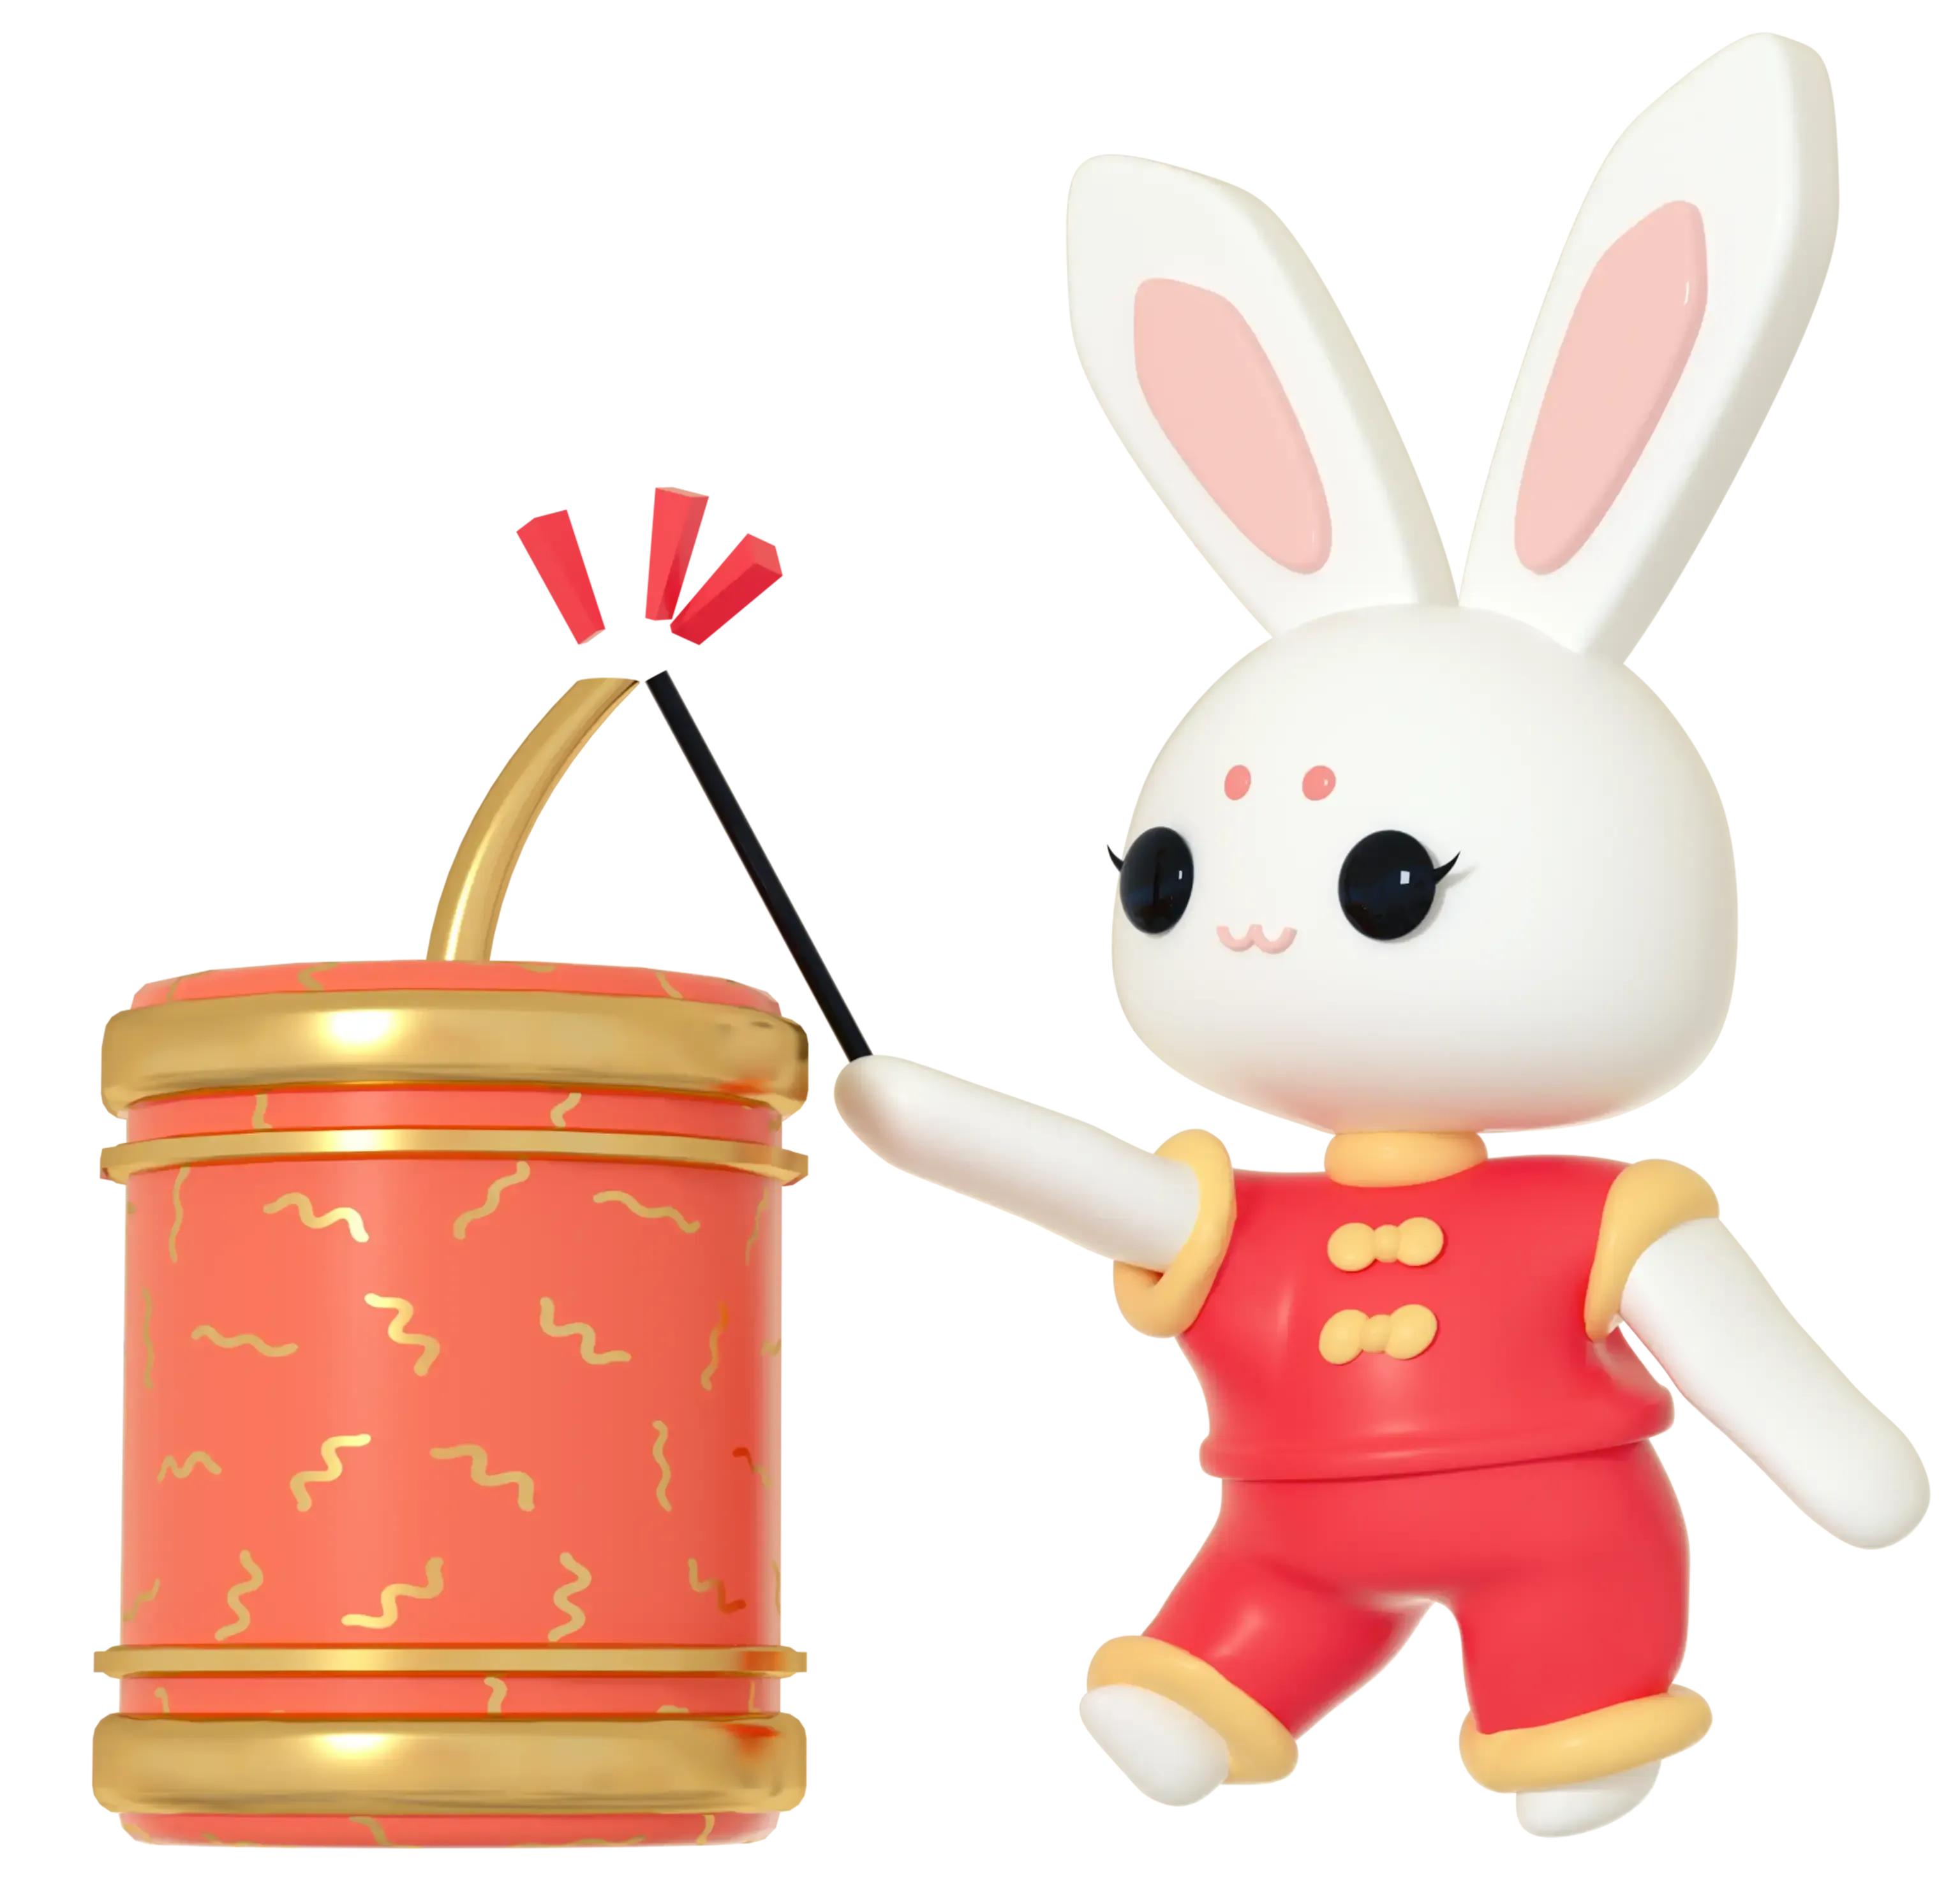 Year of the Rabbit-Set off firecrackers